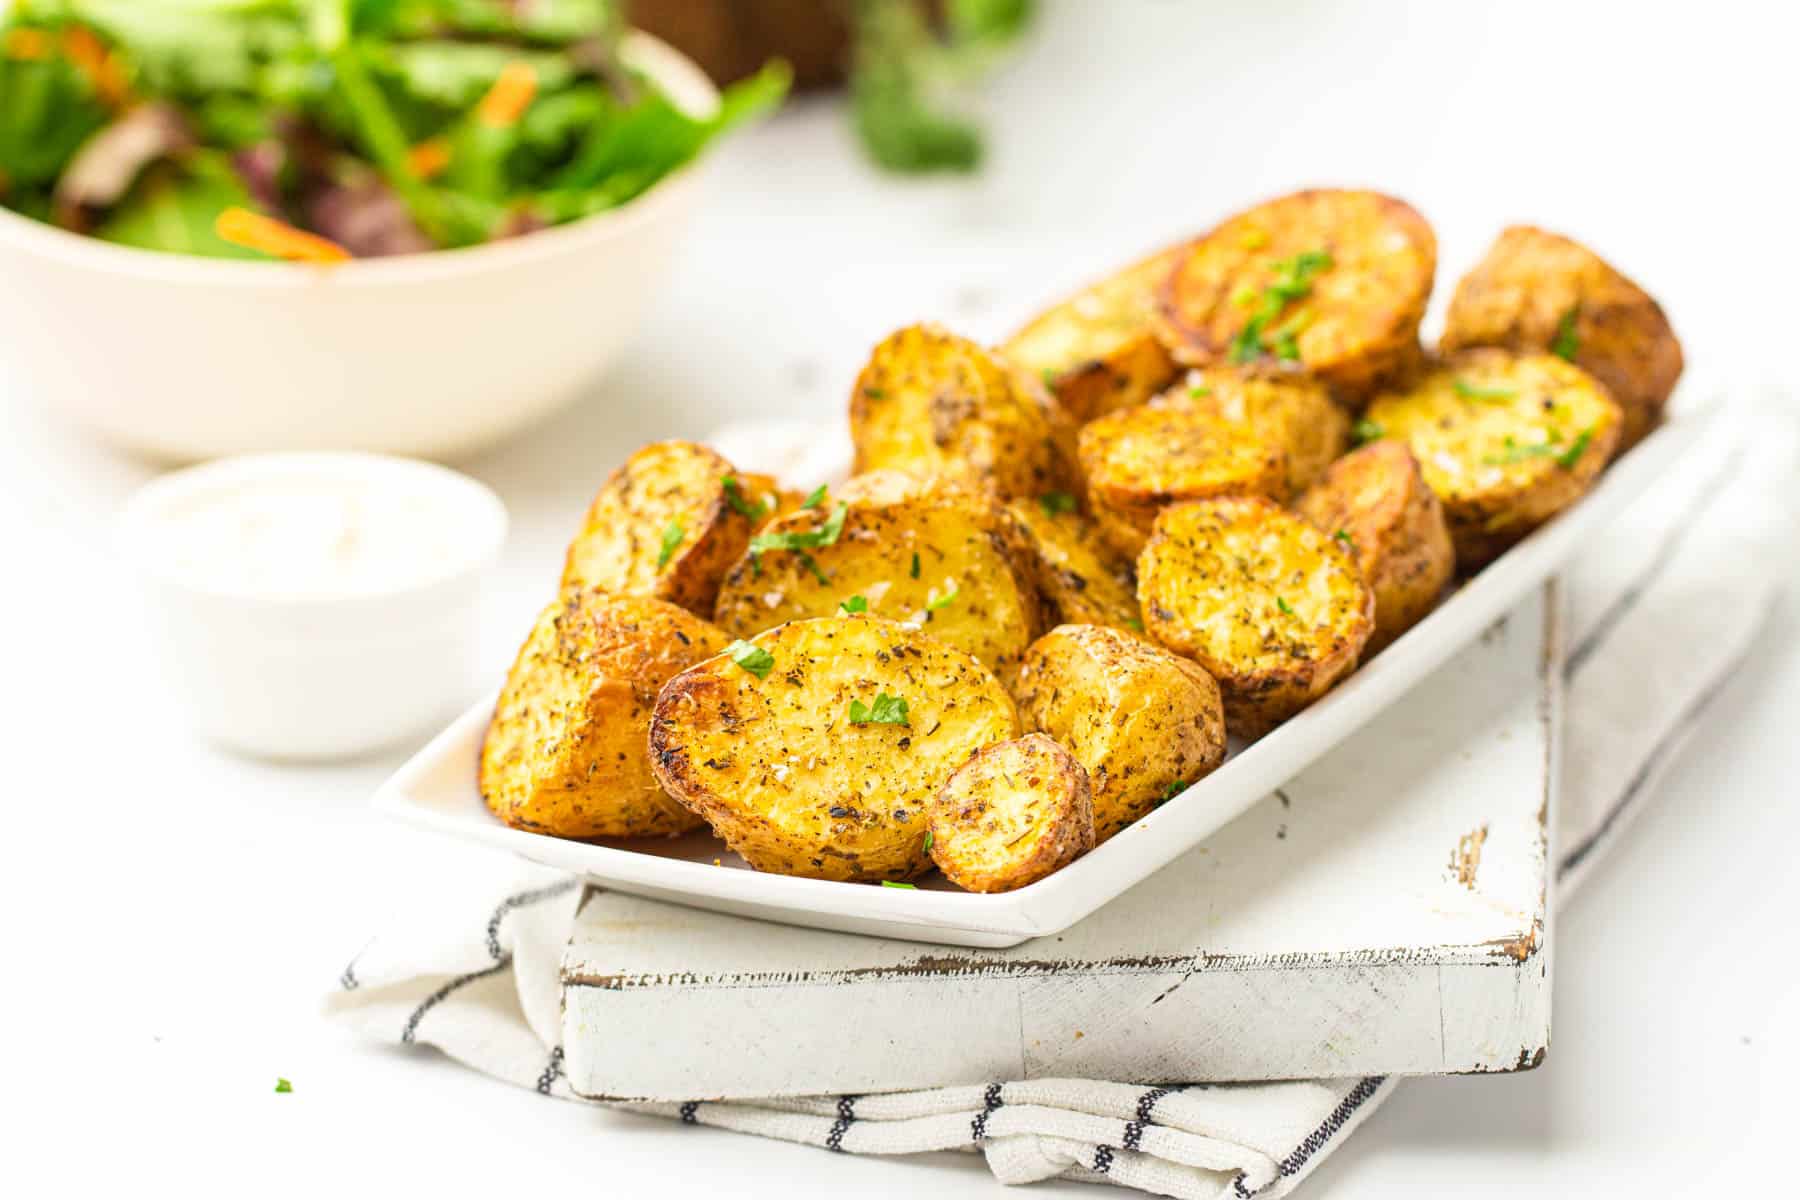 roasted potatoes on a large platter next to a salad and dipping sauce